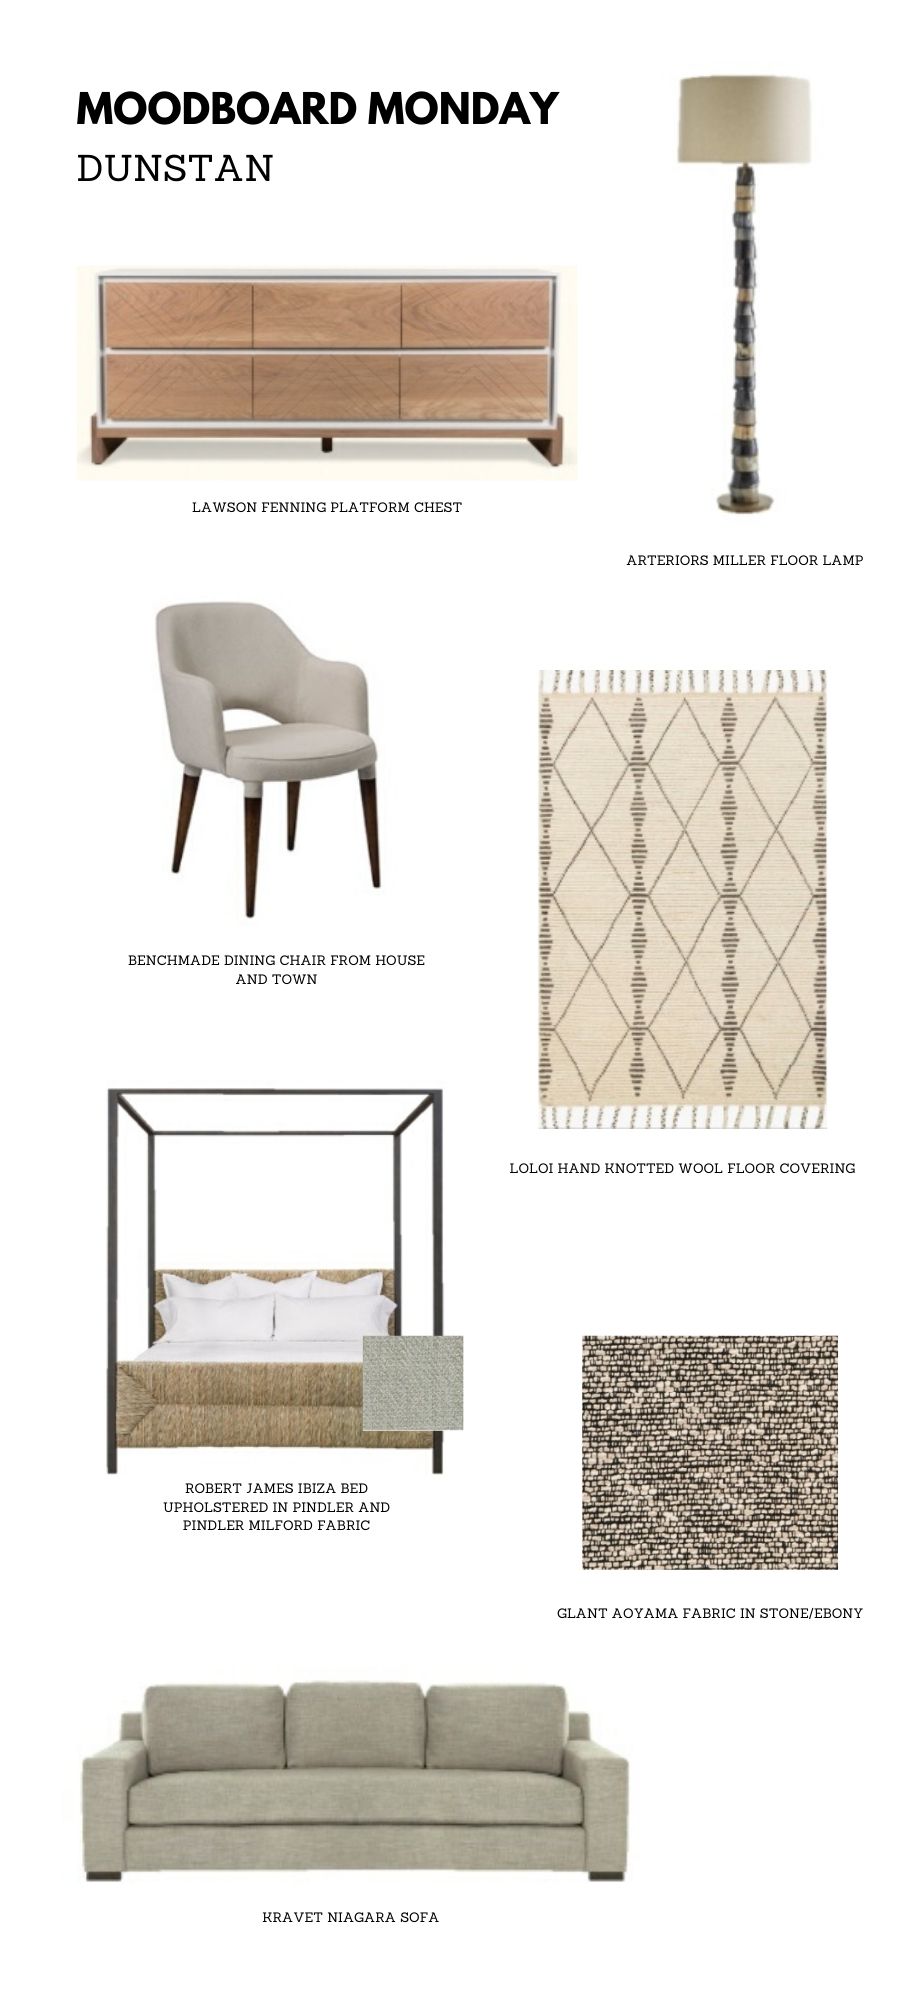 Moodboard Monday for Dunstan showcasing the neutral furnishings in this modern home, by Laura U